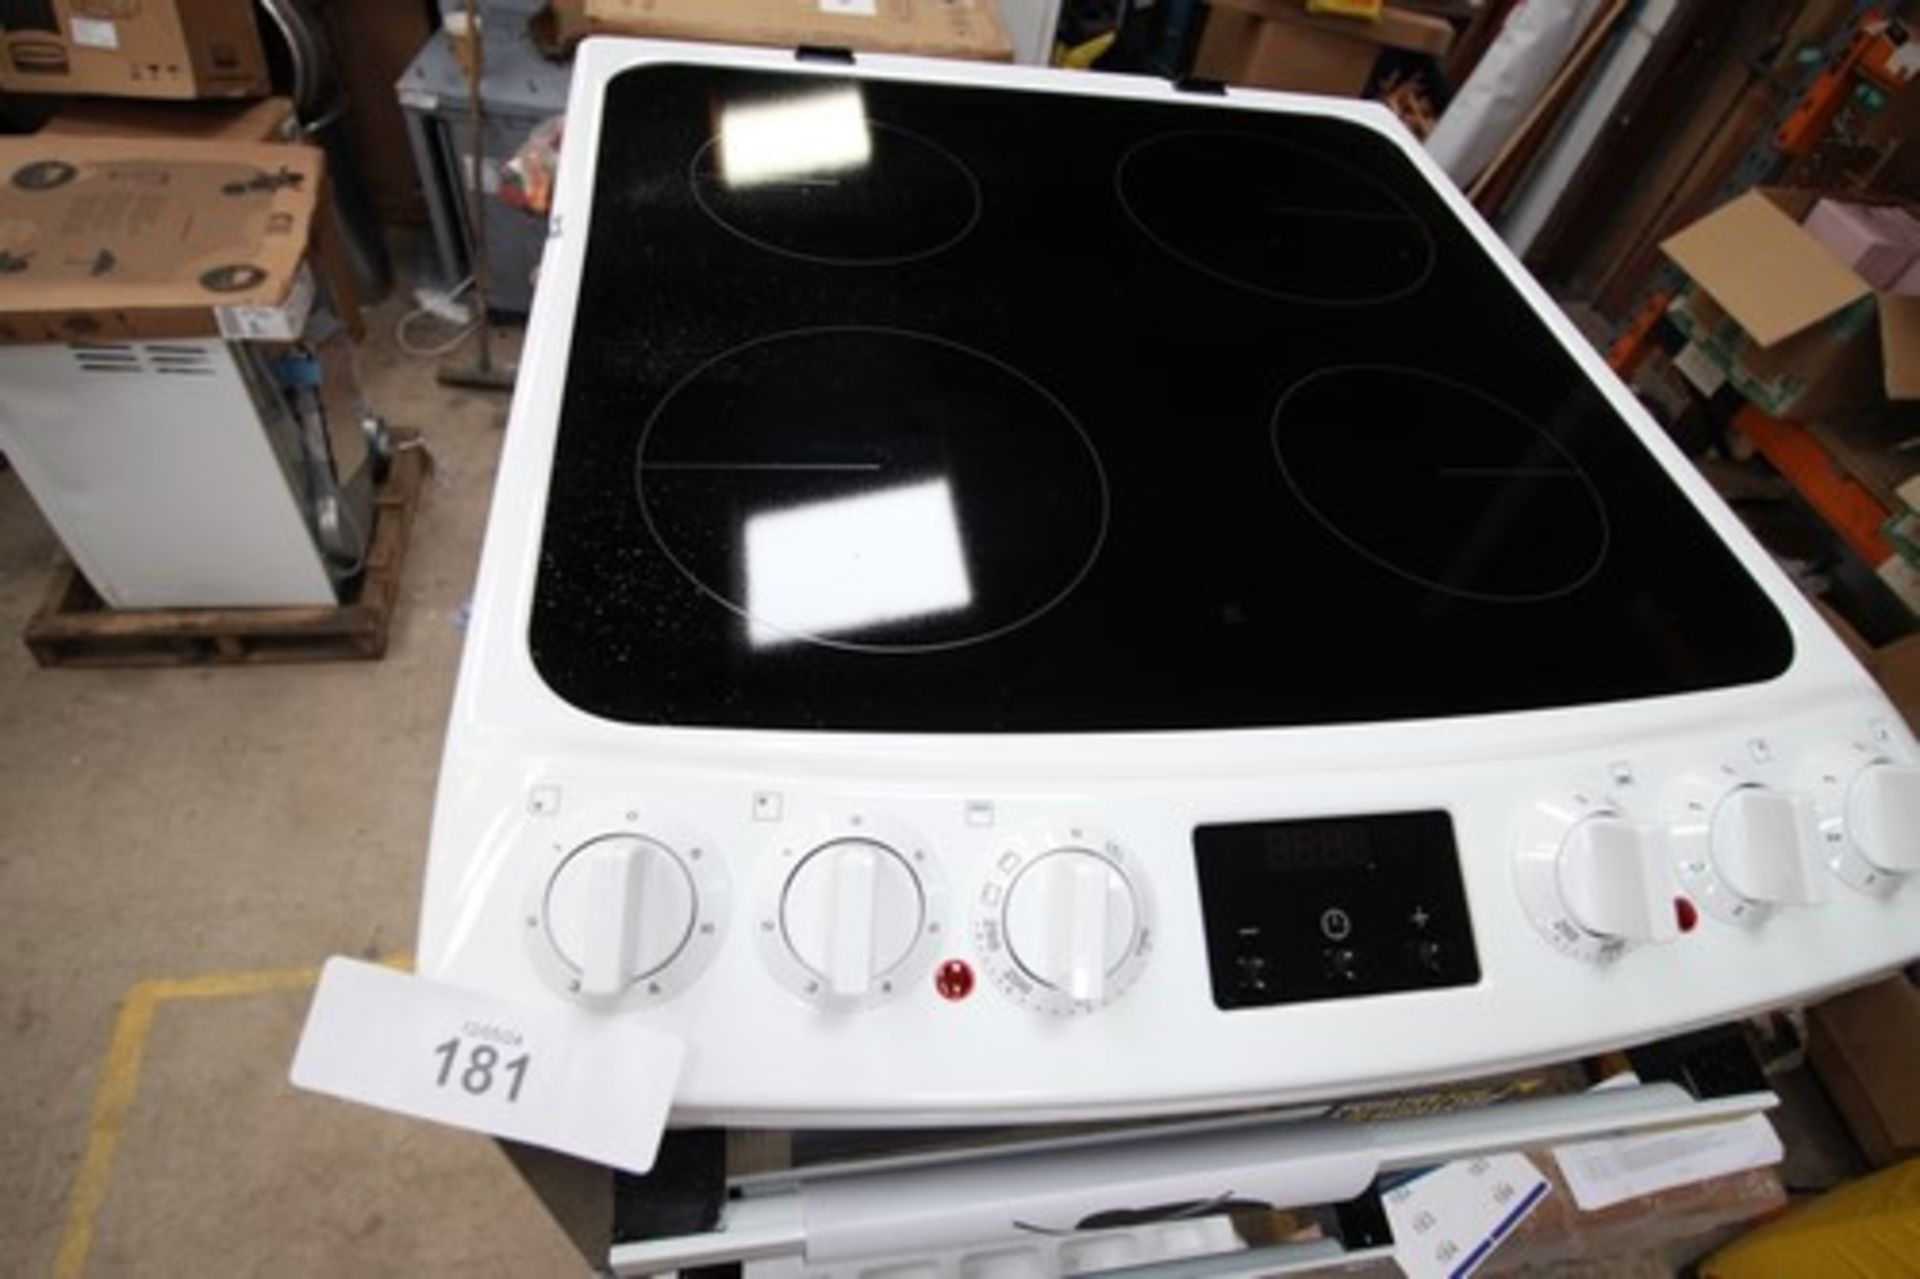 1 x Zanussi electric double oven and hob, Model ZCV46250WA, dented left hand side panel (eBay 6) - Image 2 of 5